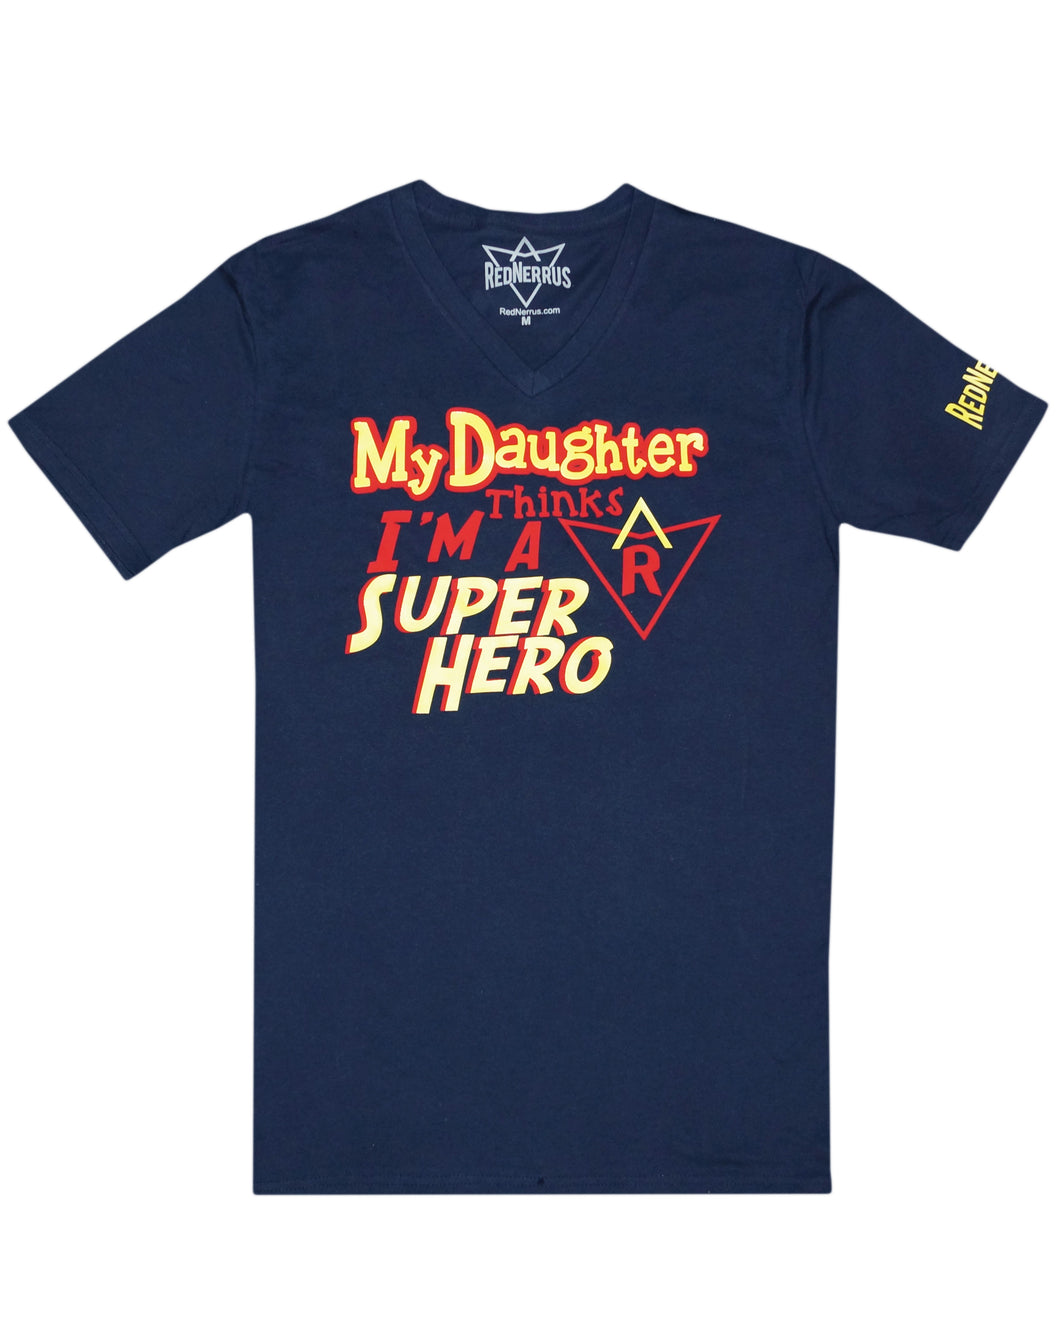 My Daughter Thinks I'm A Superhero V-Neck Tee -- Navy/Yellow/Red